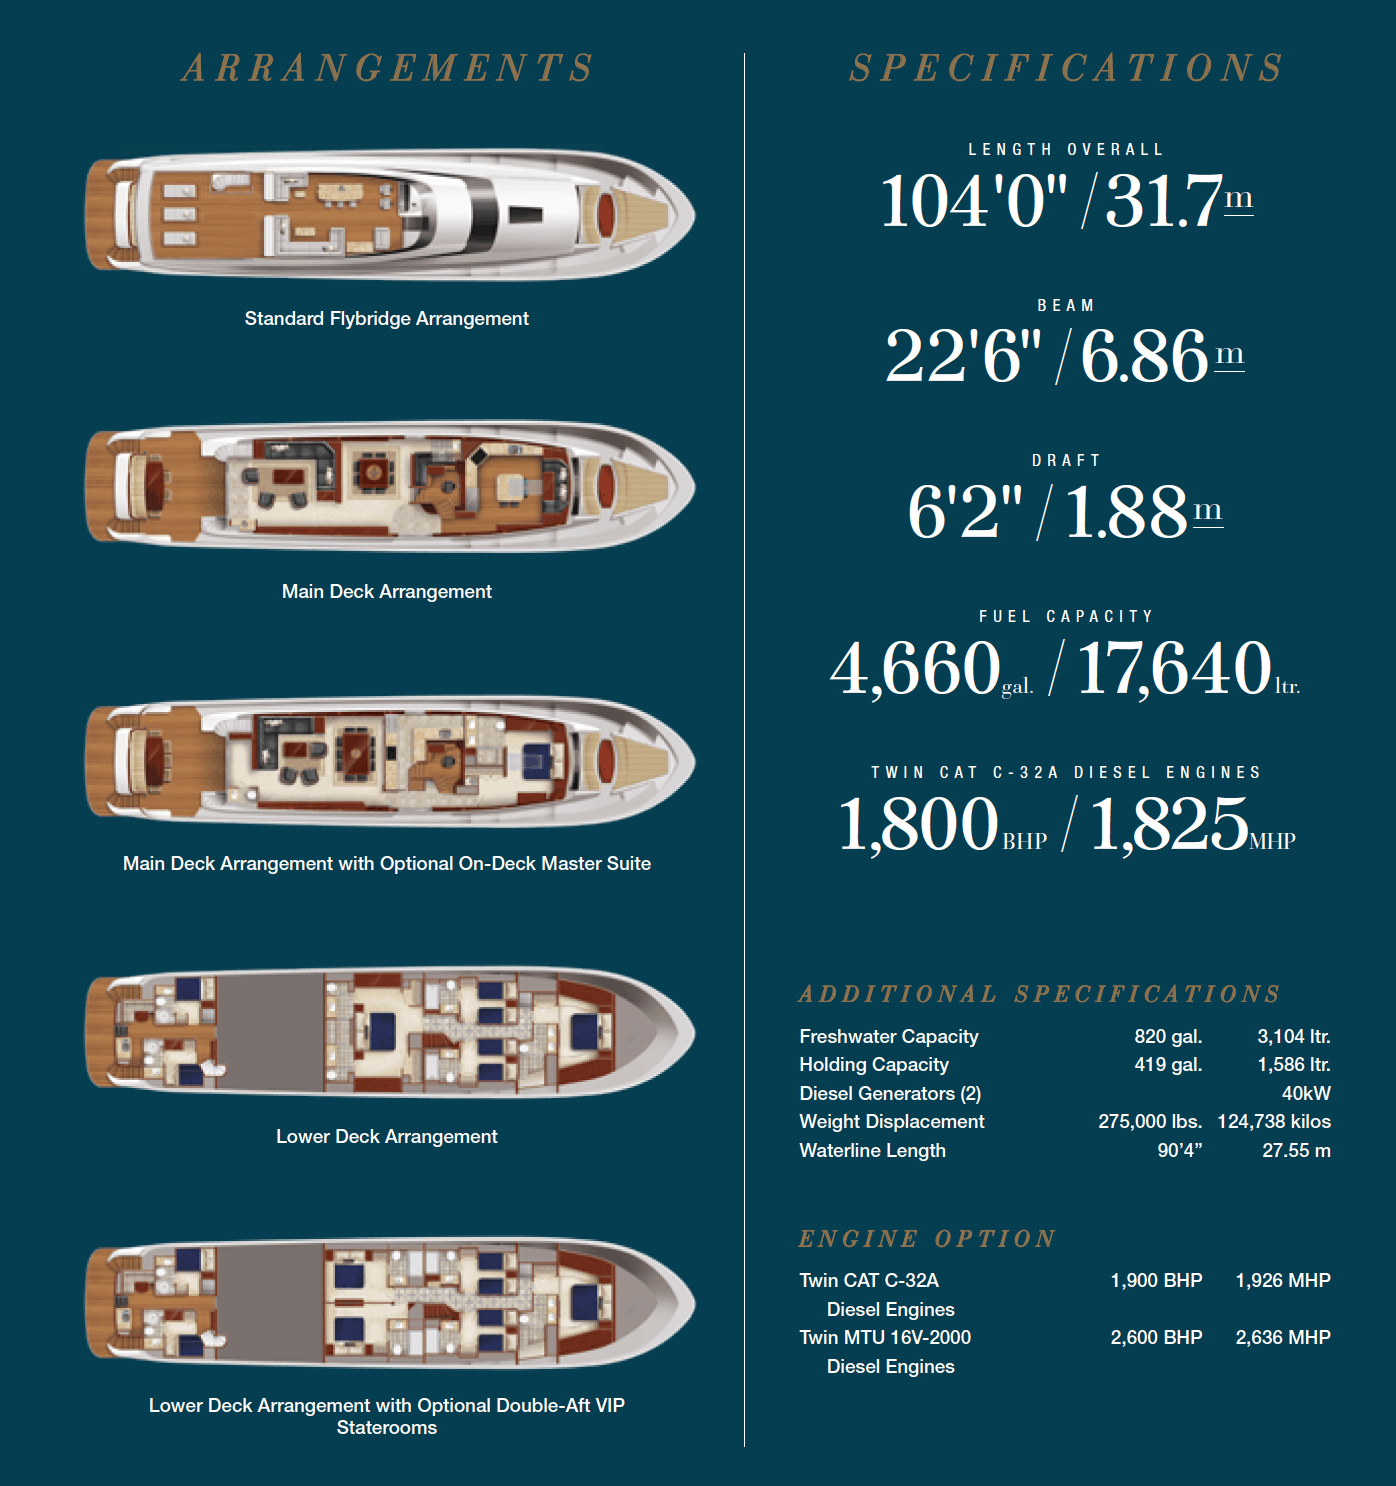 Hatteras 105 Raised Pilothouse Specs and Layouts